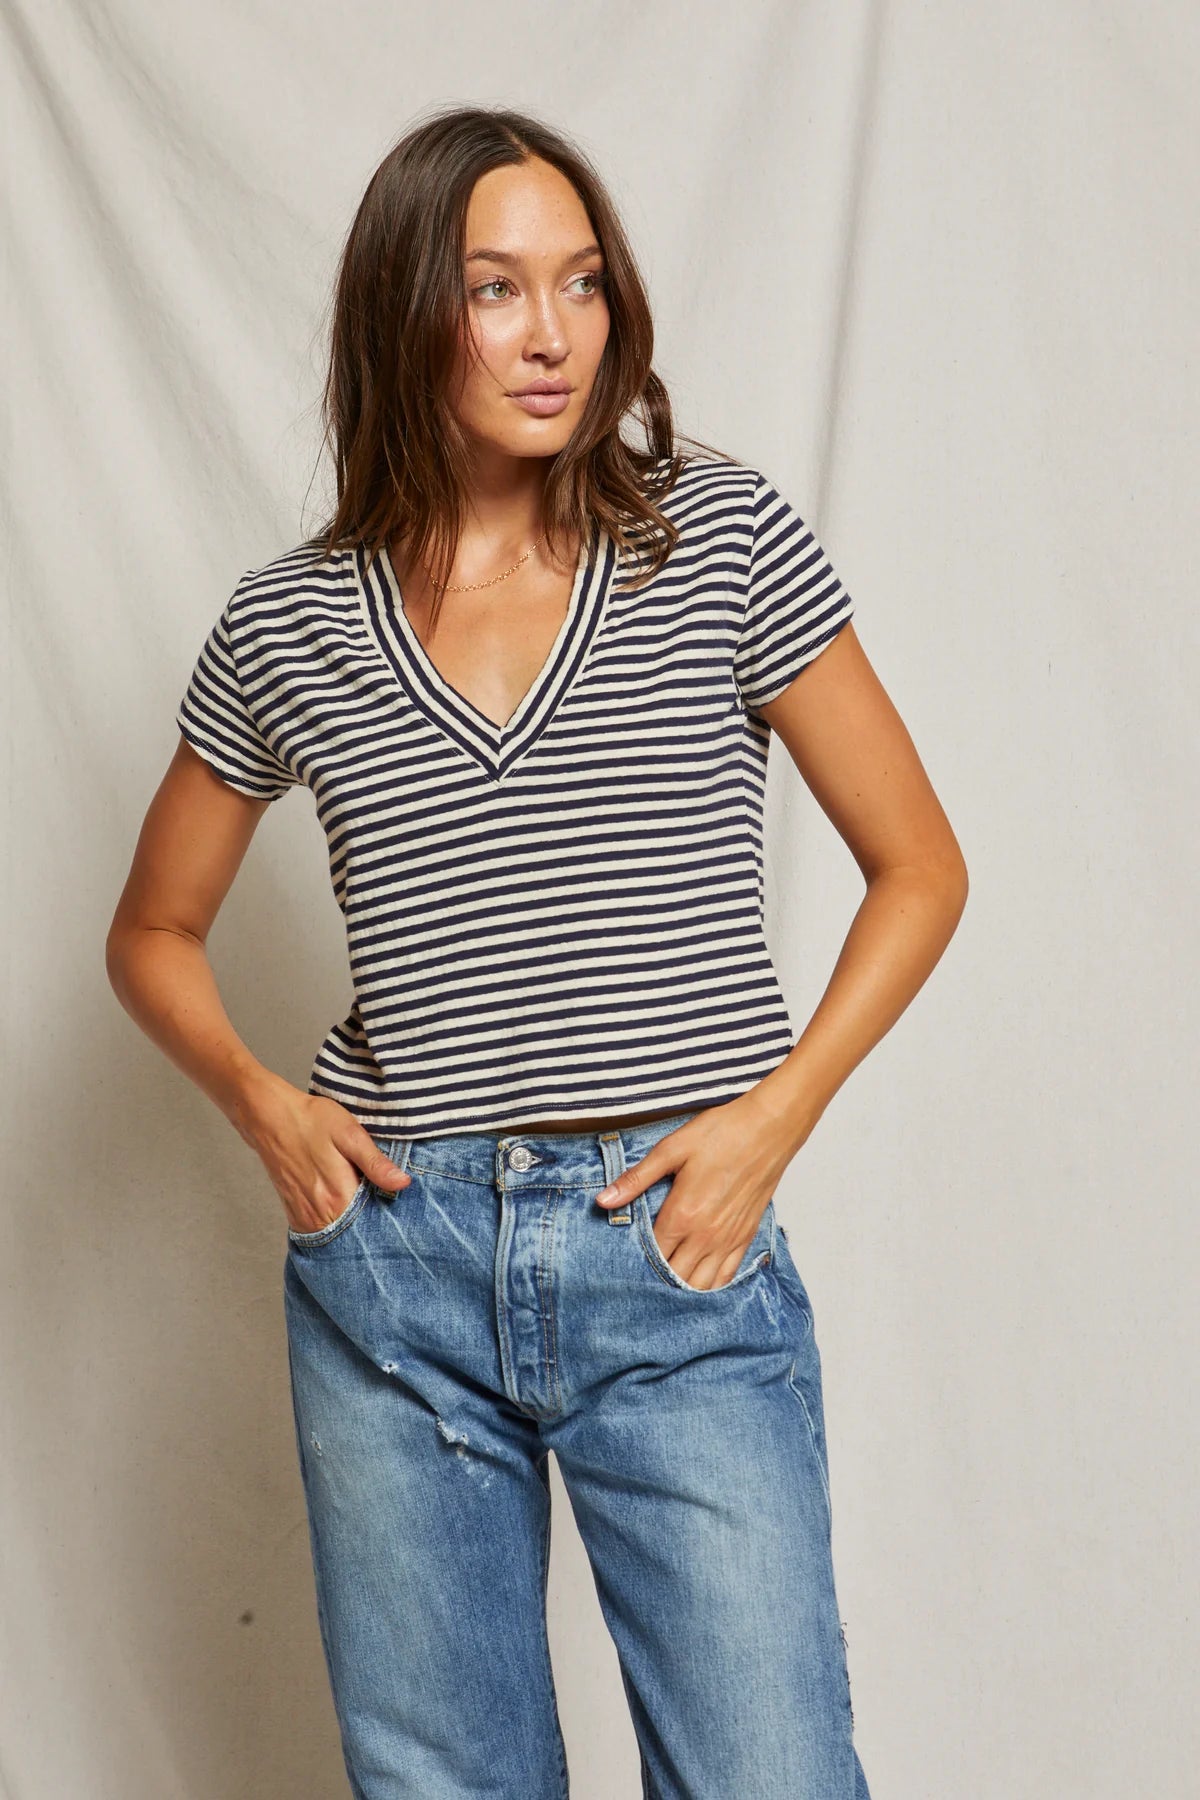 Perfect White Tee's Alanis V Neck Tee in the colors Navy White Stripe